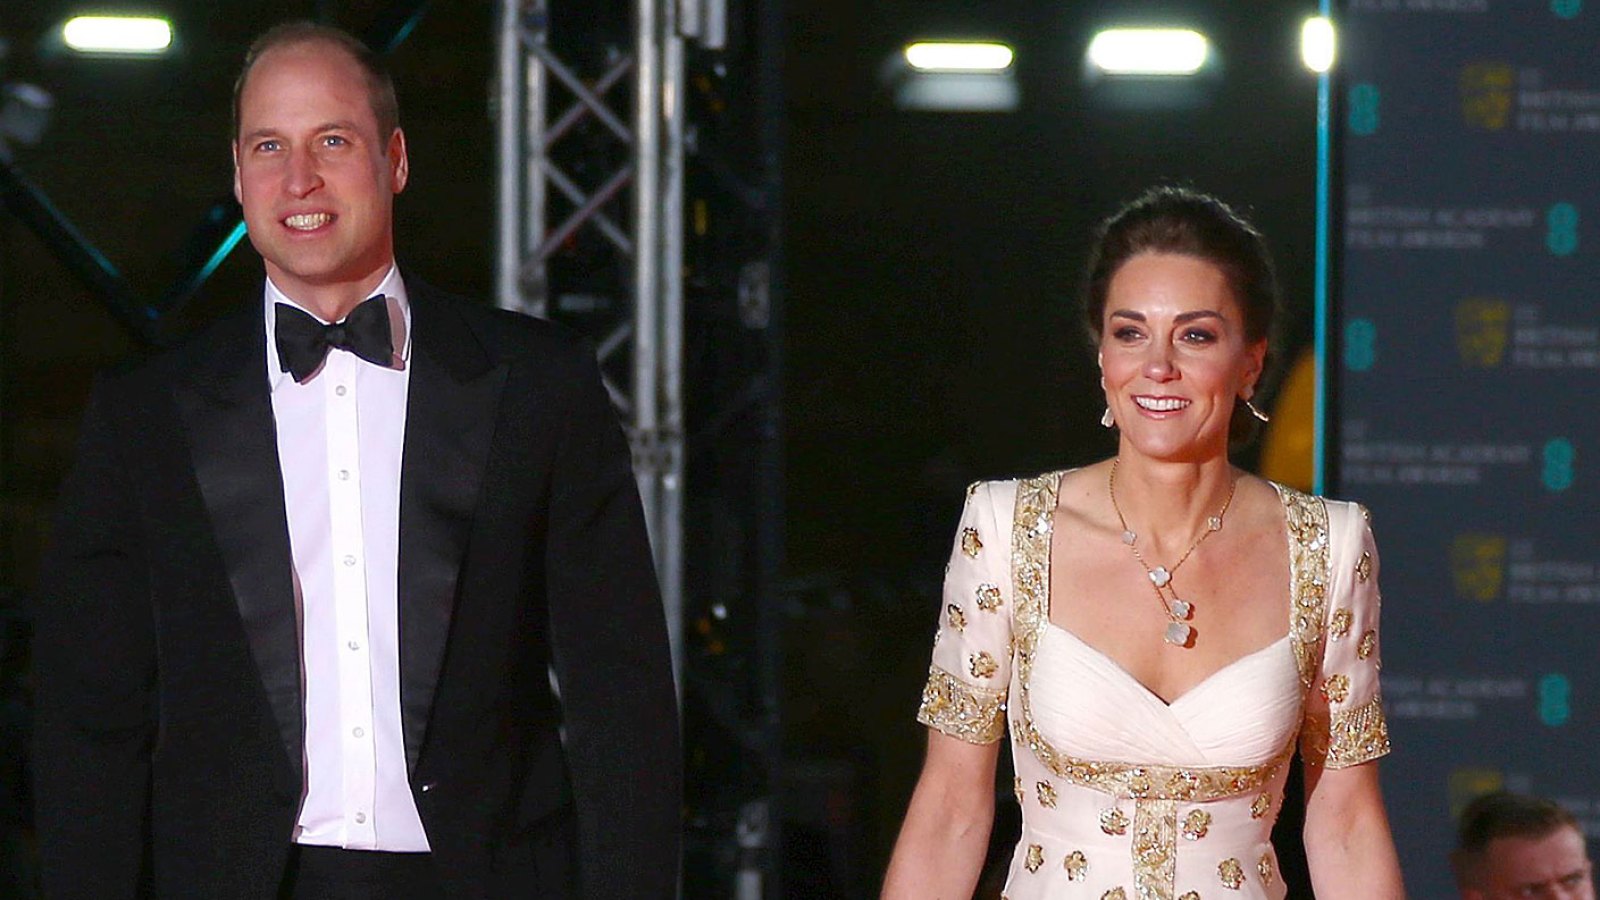 Why Prince William and Kate Middleton Are Going to ‘James Bond’ Premiere